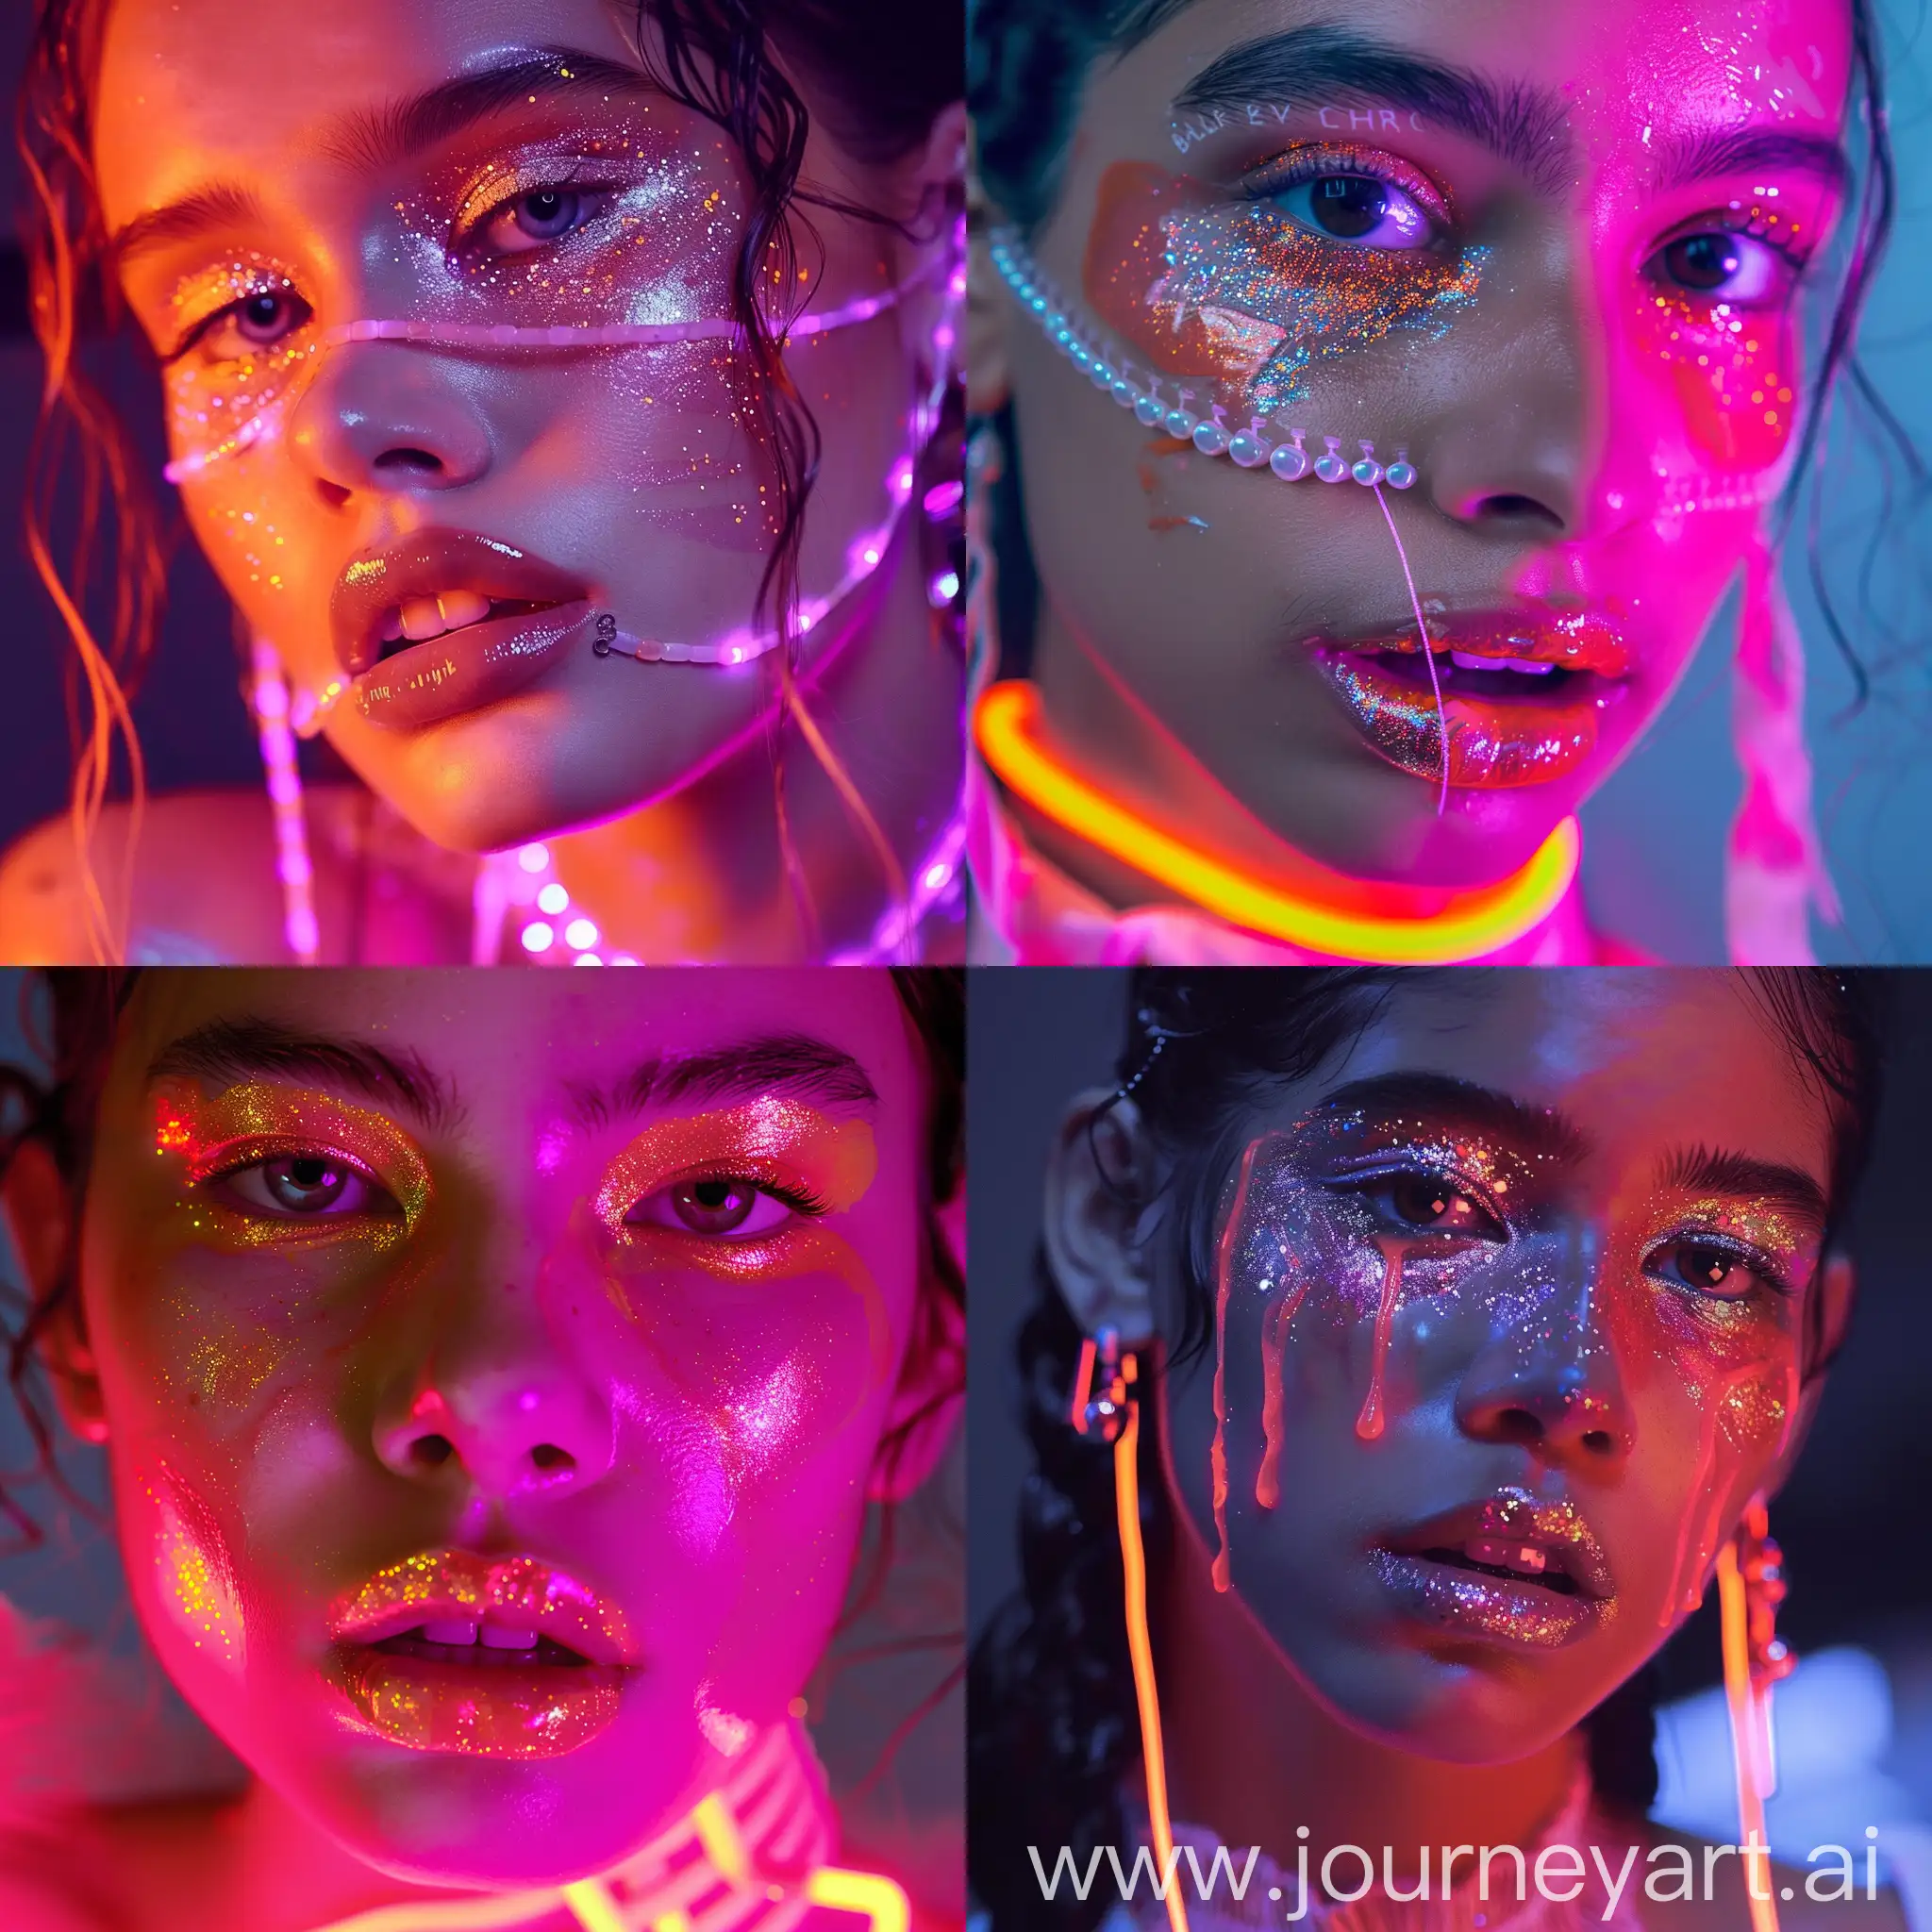 Beautiful-Mexican-Girl-with-Pearly-and-Opalescent-Makeup-in-Balenciaga-Fashion-Pink-and-Orange-Neon-Lighting